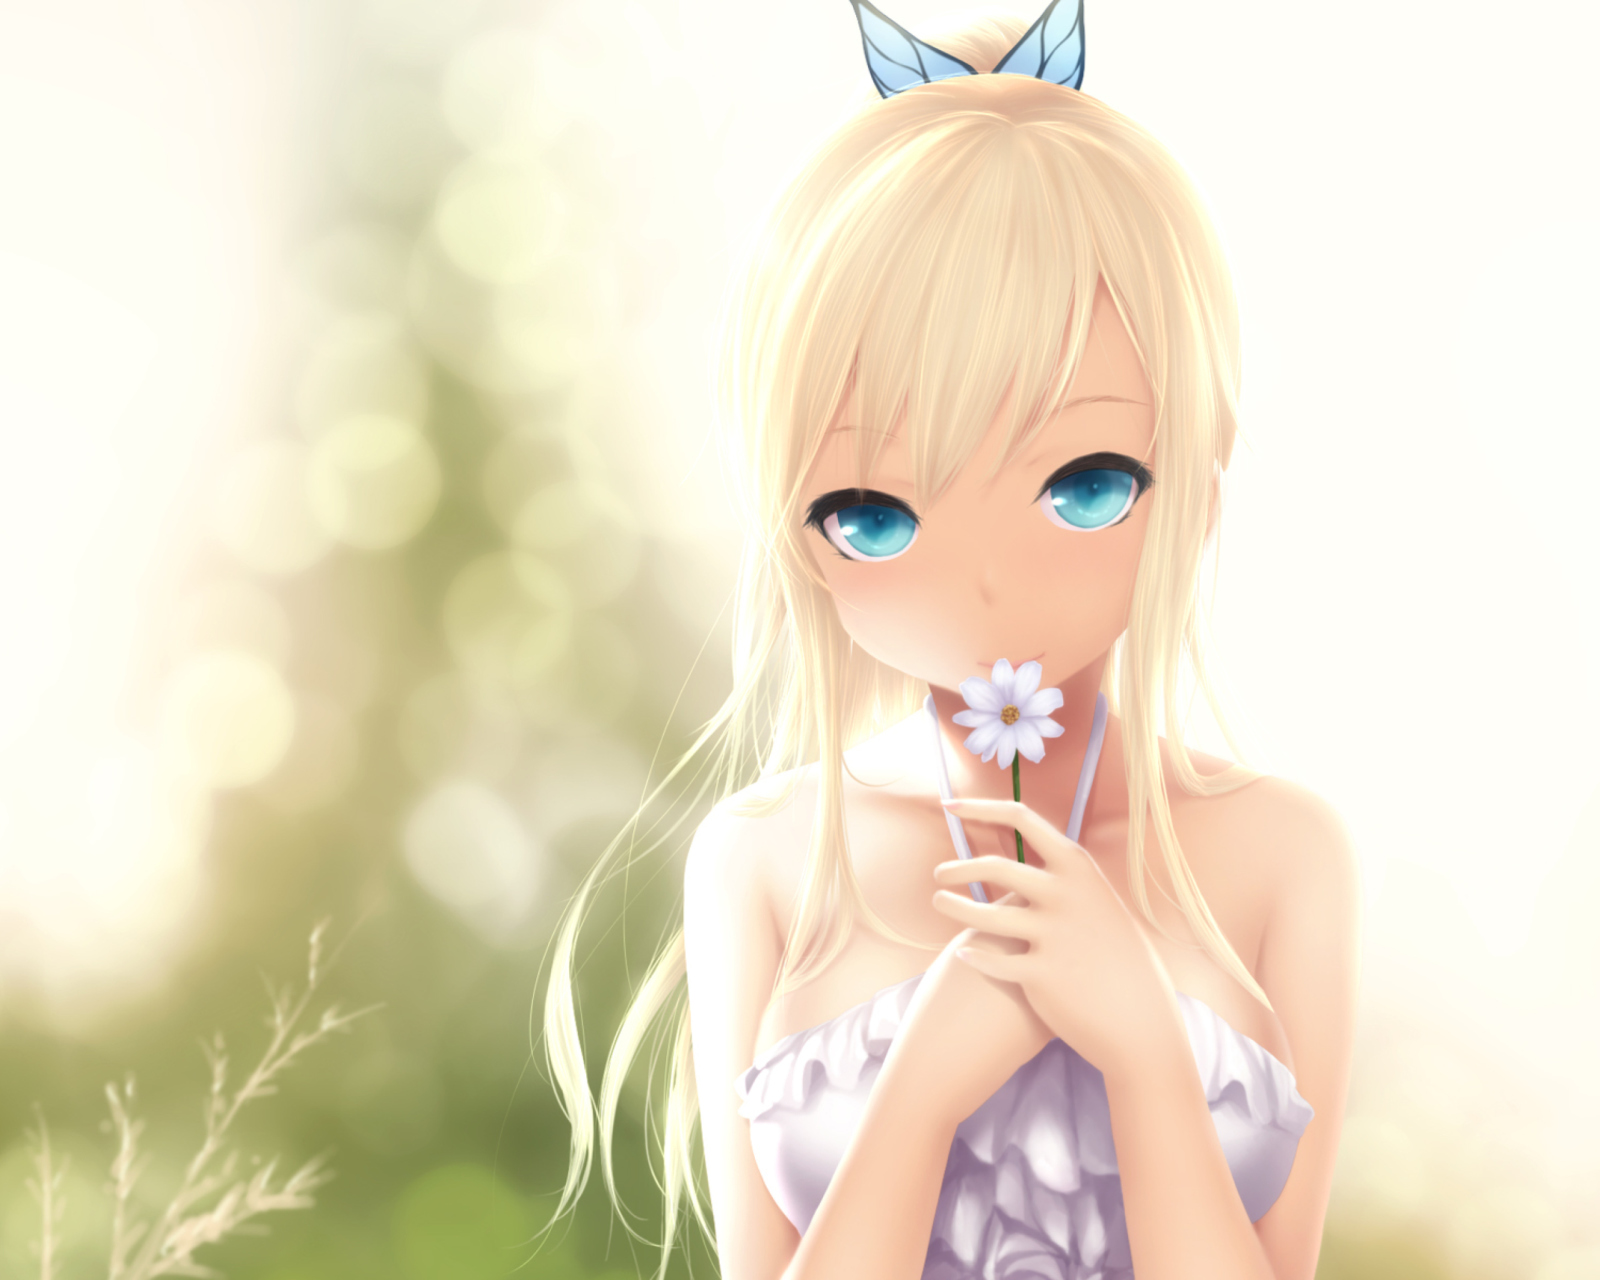 Anime Blonde With Daisy wallpaper 1600x1280